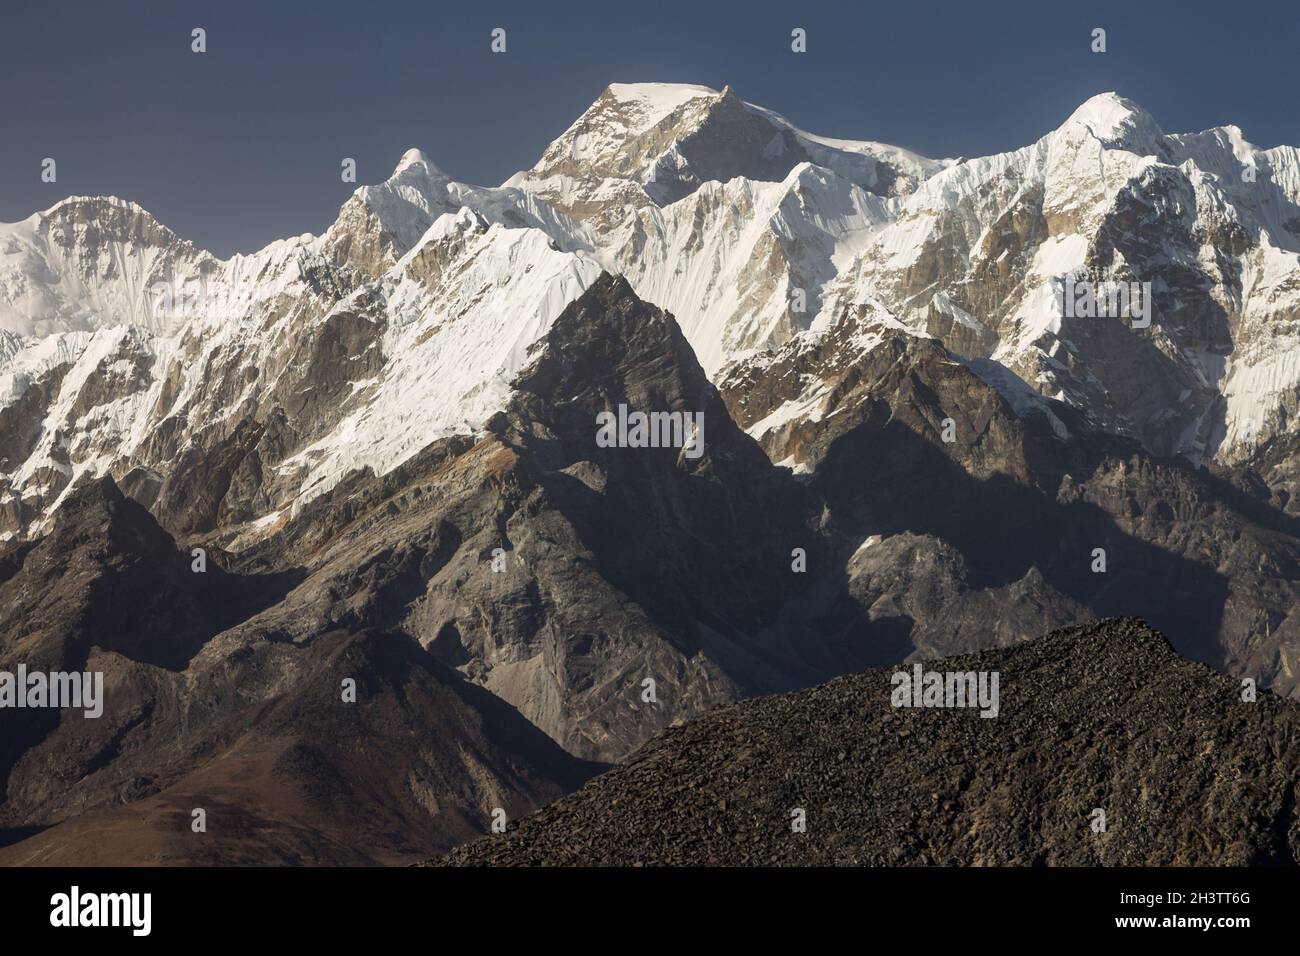 Gyachung Kang and other peaks seen from a place above the Ama Dablam Base Camp Stock Photo